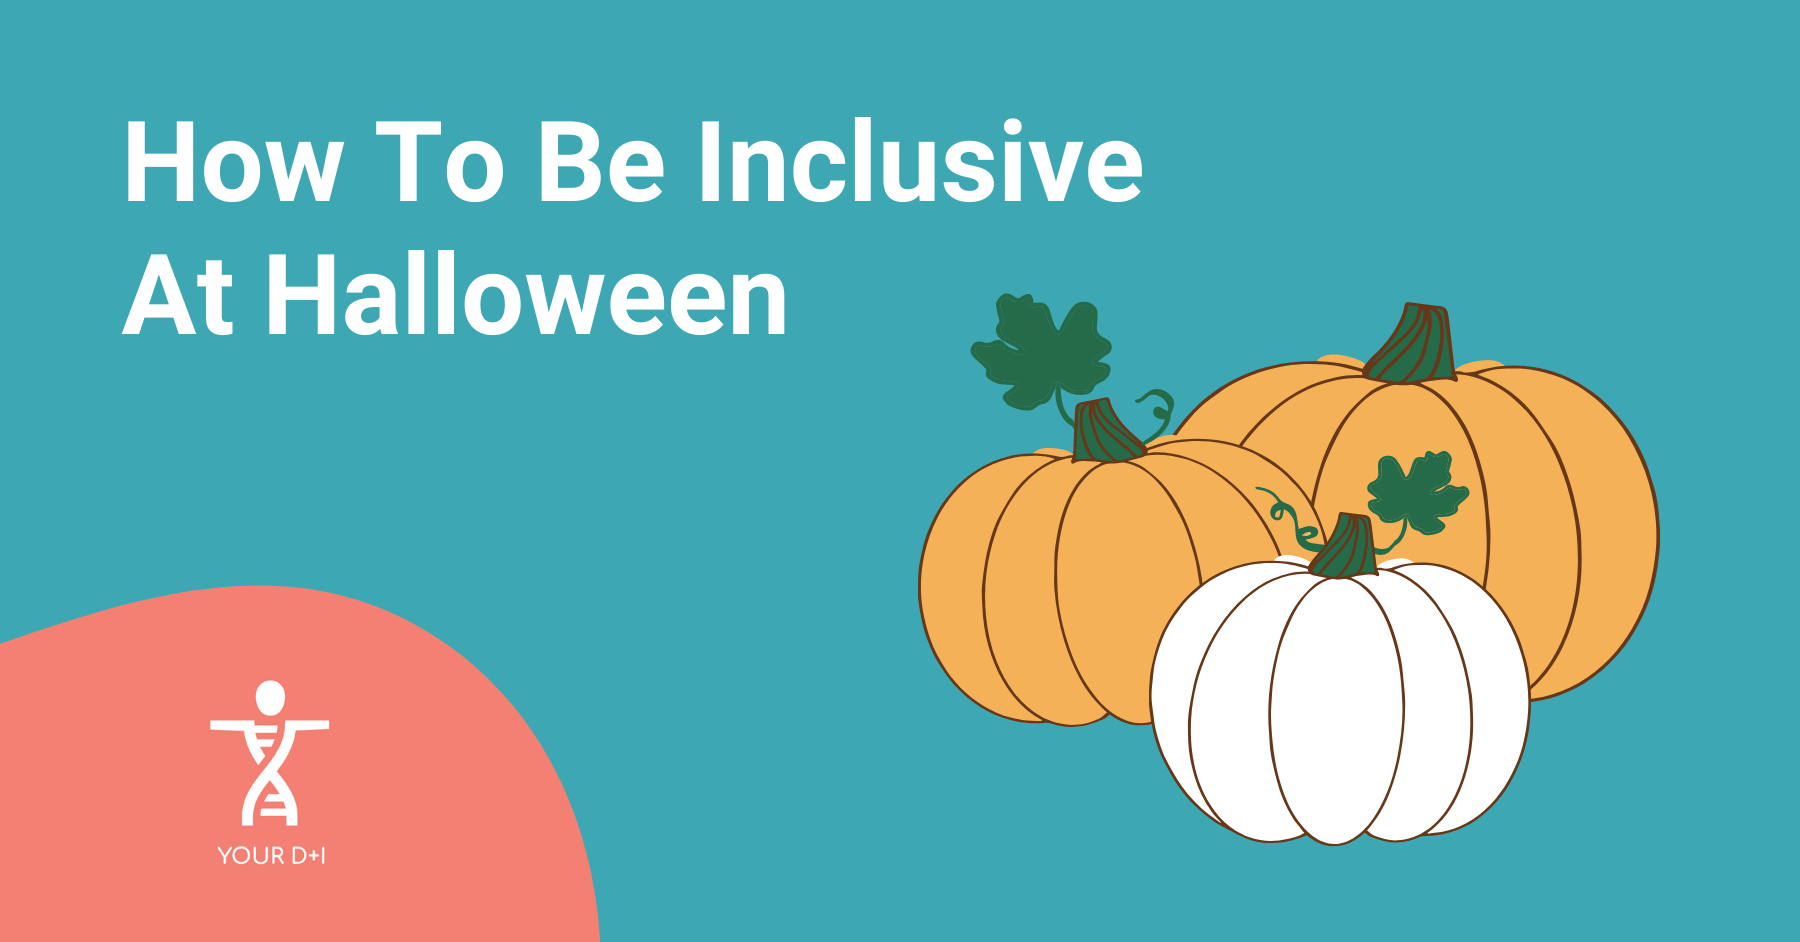 How To Be Inclusive At Halloween